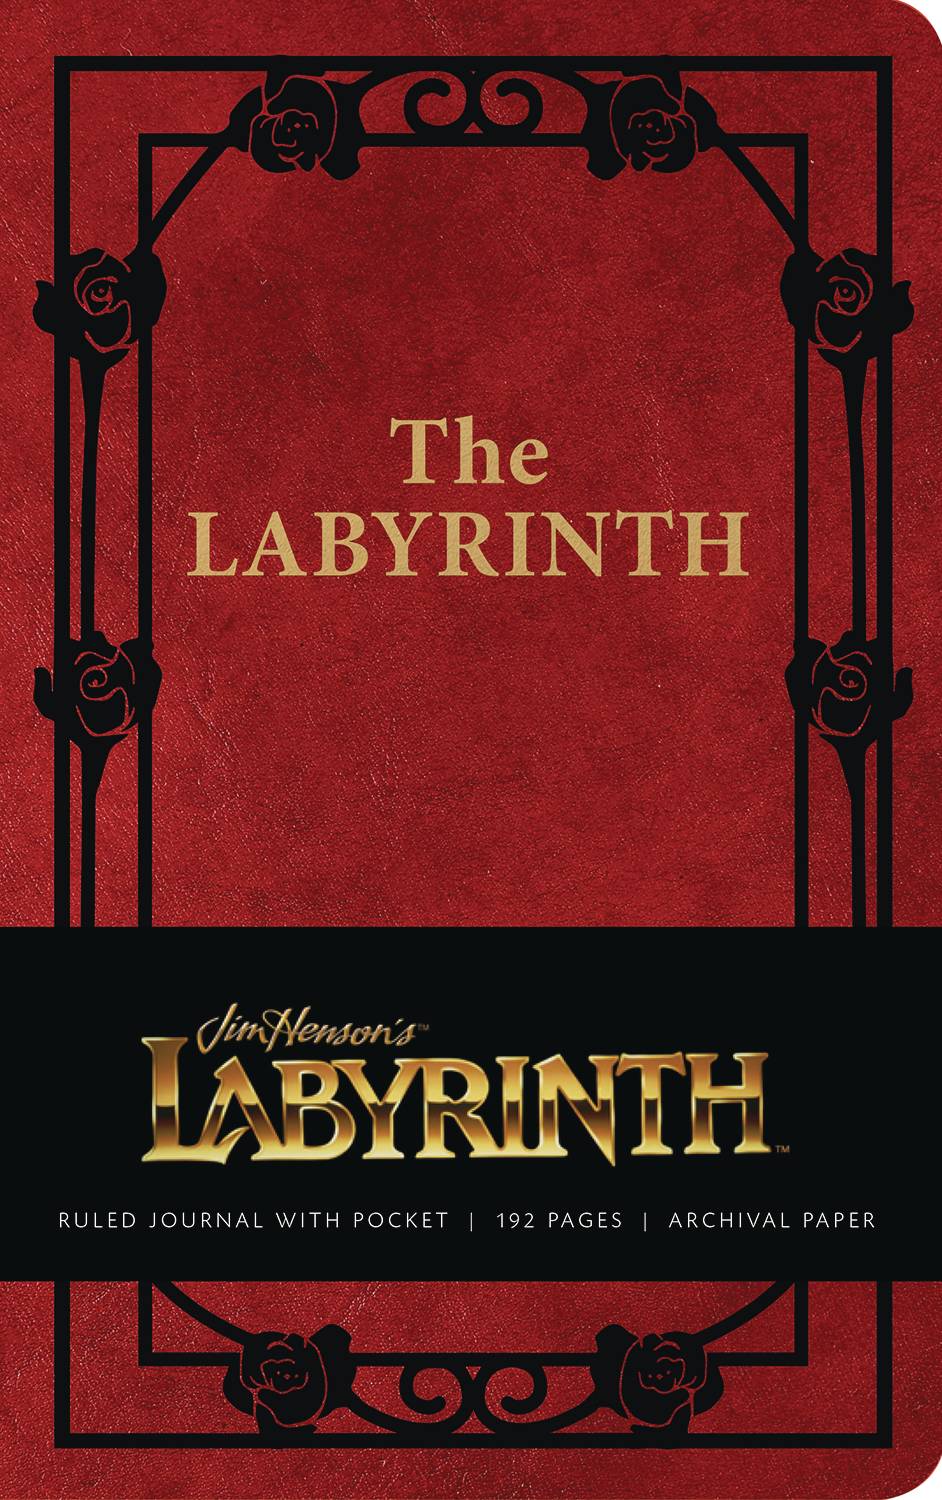 LABYRINTH HARDCOVER RULED JOURNAL